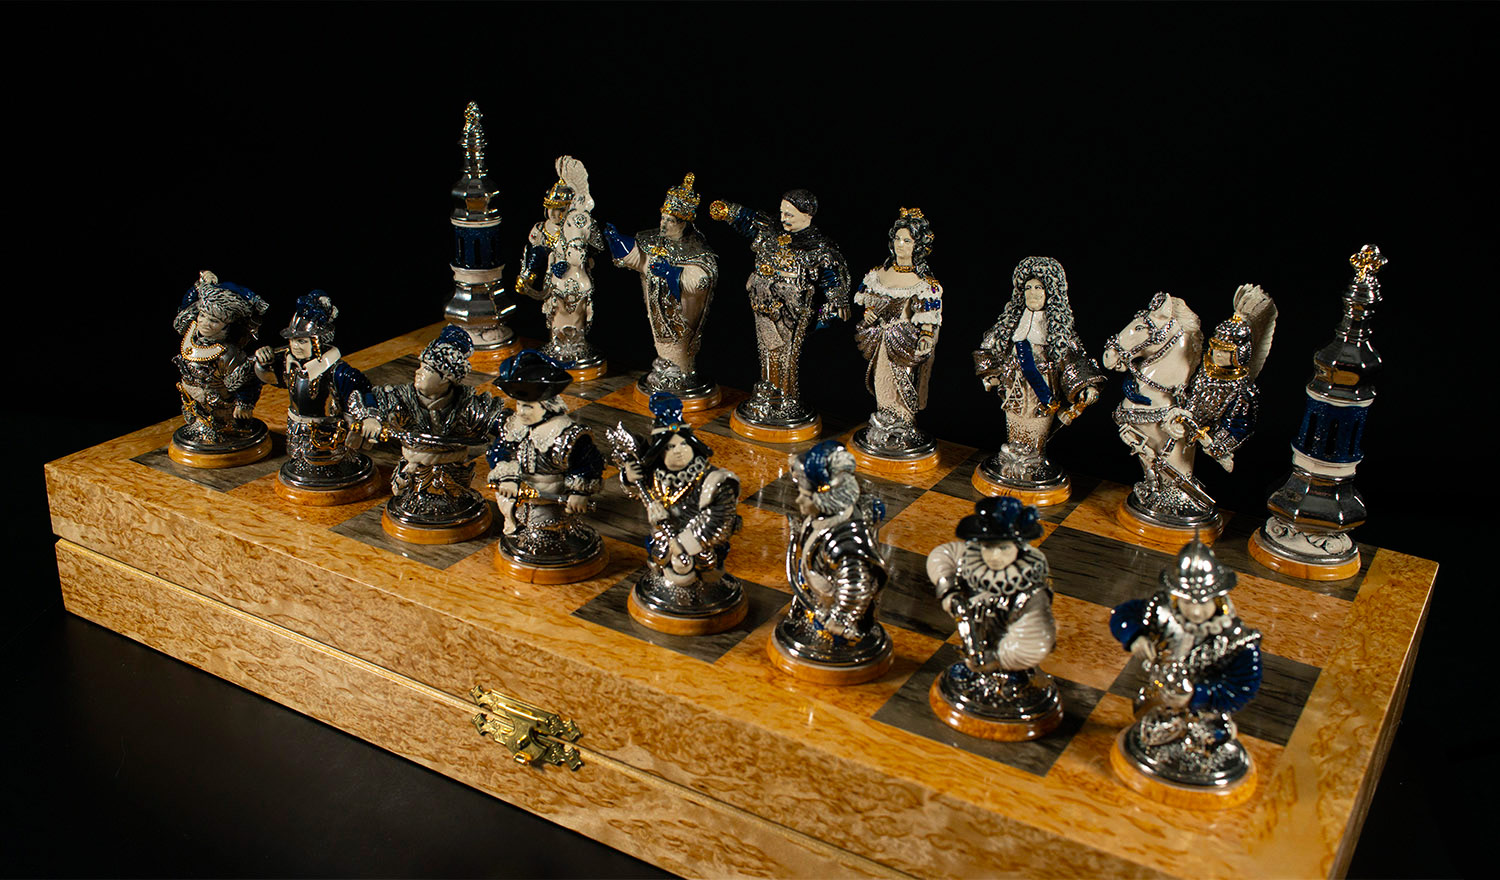 Grahl Chess Set - Most Expensive Chess Set